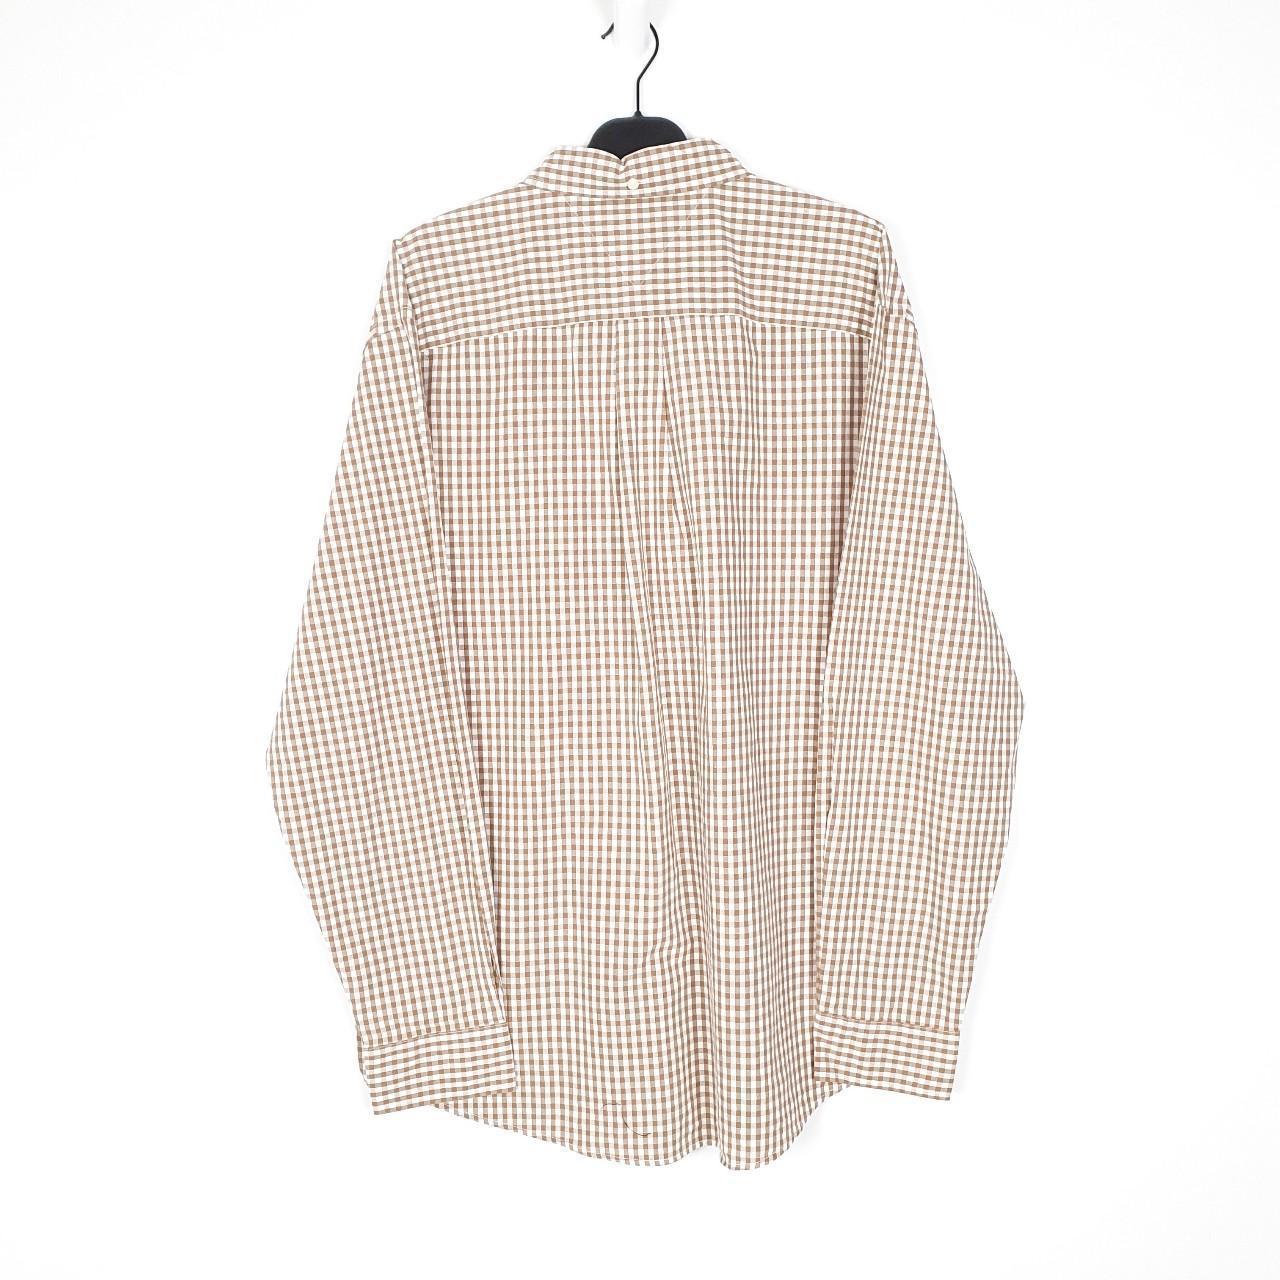 Tommy Hilfiger Long Sleeve Classic Fit Gingham Shirt